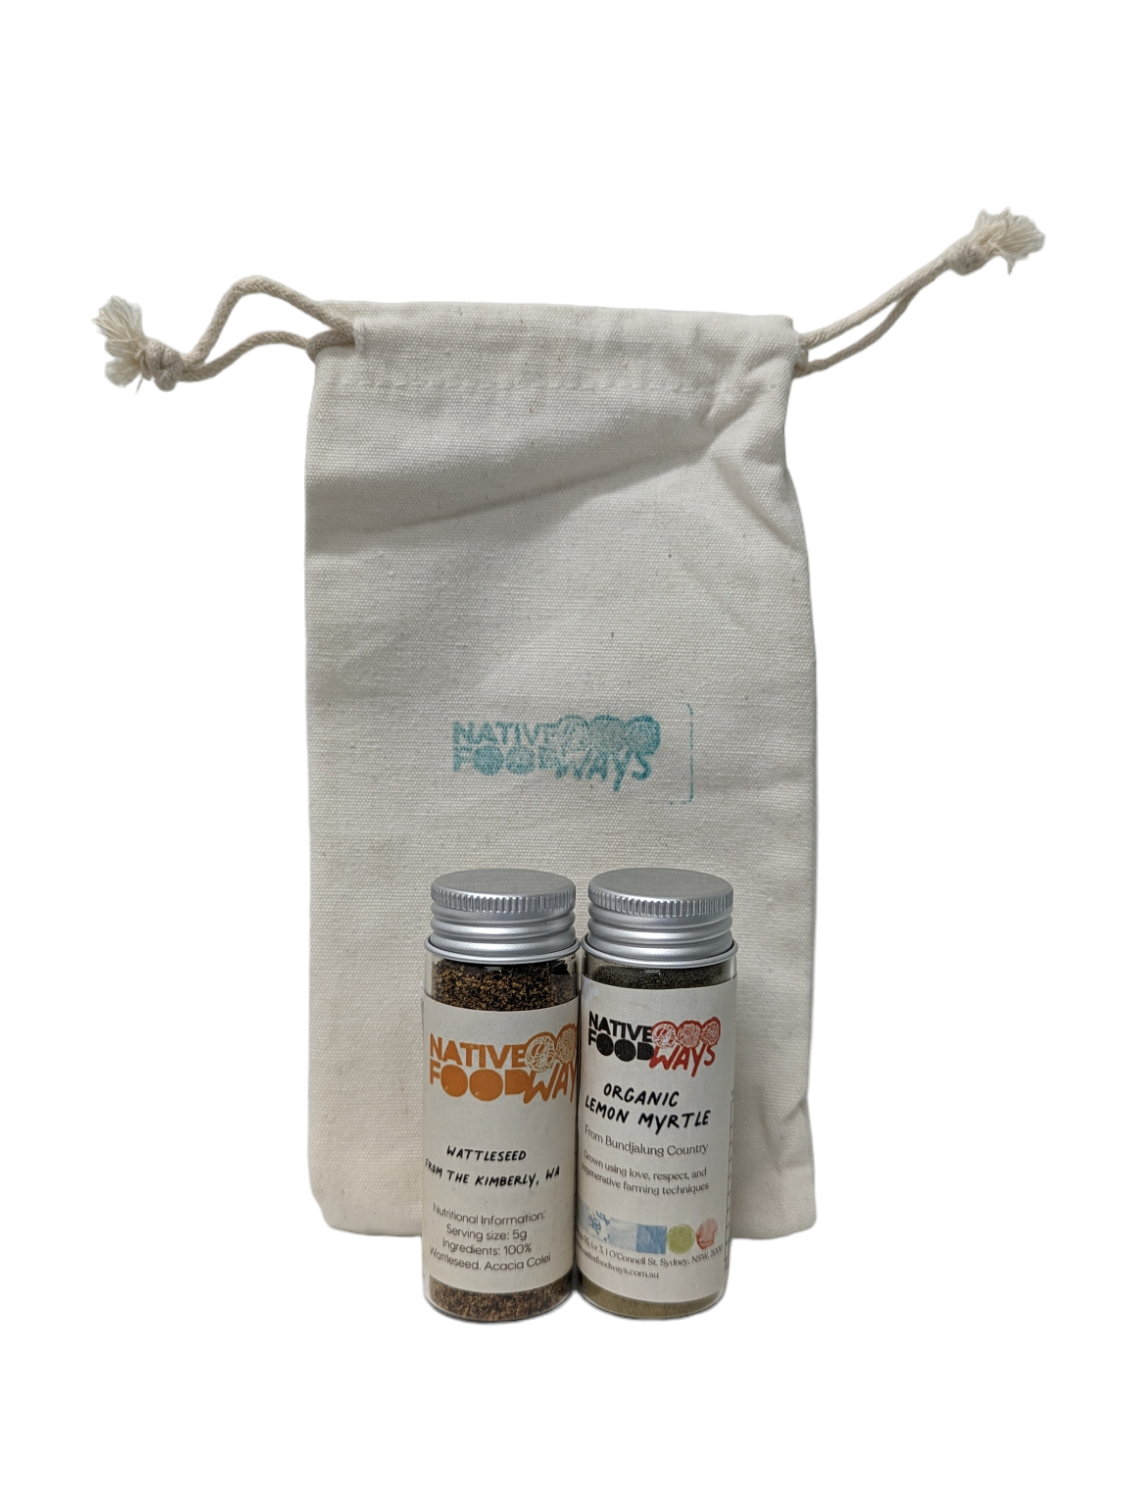 Wild Harvested Wattleseed and Organic Lemon Myrtle Gift Pack